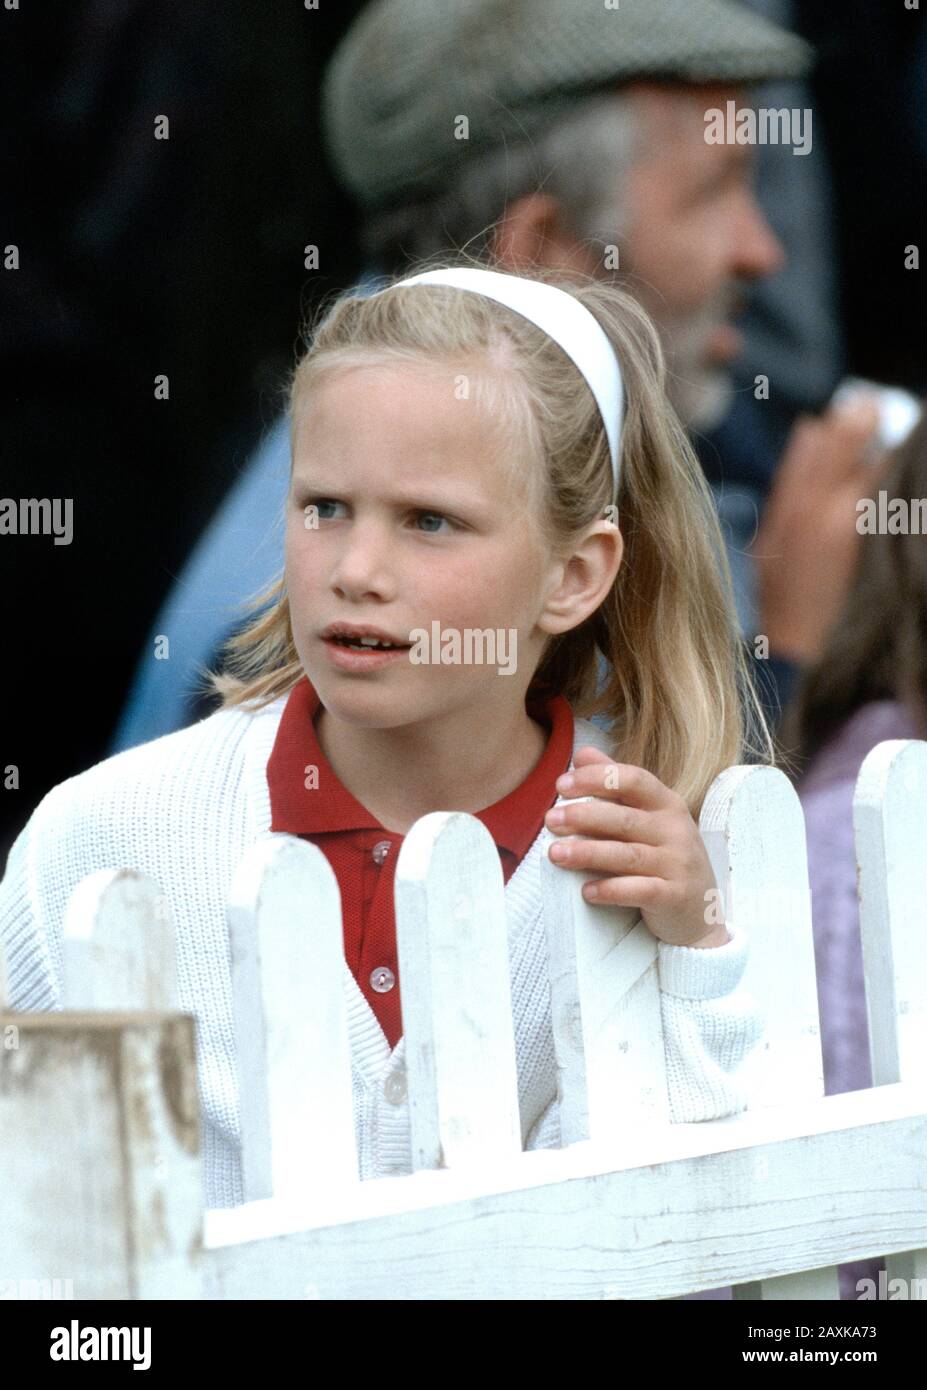 Zara Phillips at The Windsor Horse Trials, England April 1988 Stock Photo